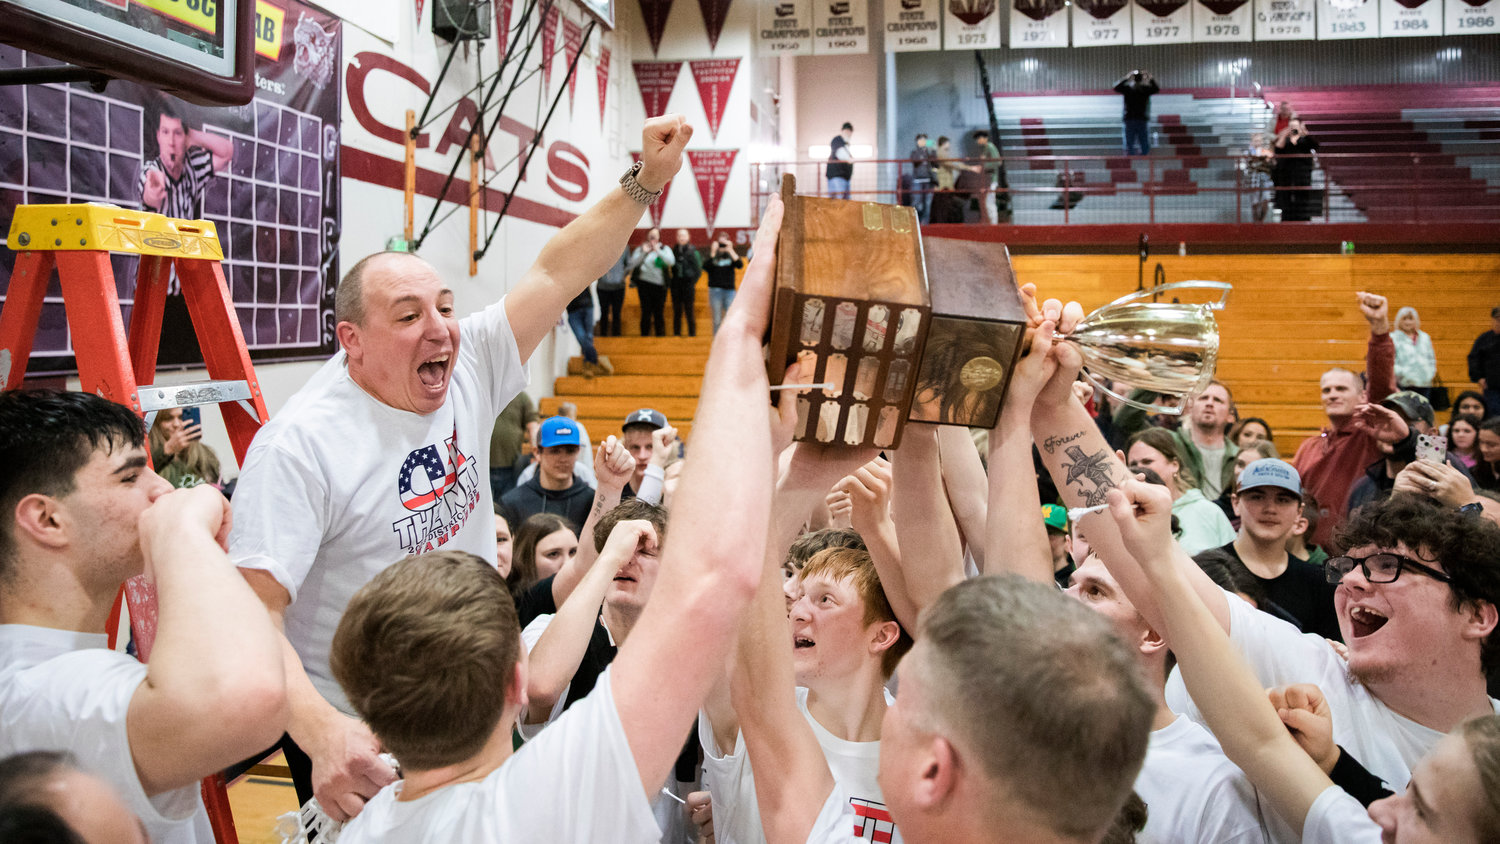 Morton-White Pass Head Coach Chad Cramer cheers with athletes and fans after defeating the Adna Pirates in the 2B District Championship game Saturday night at W.F. West.